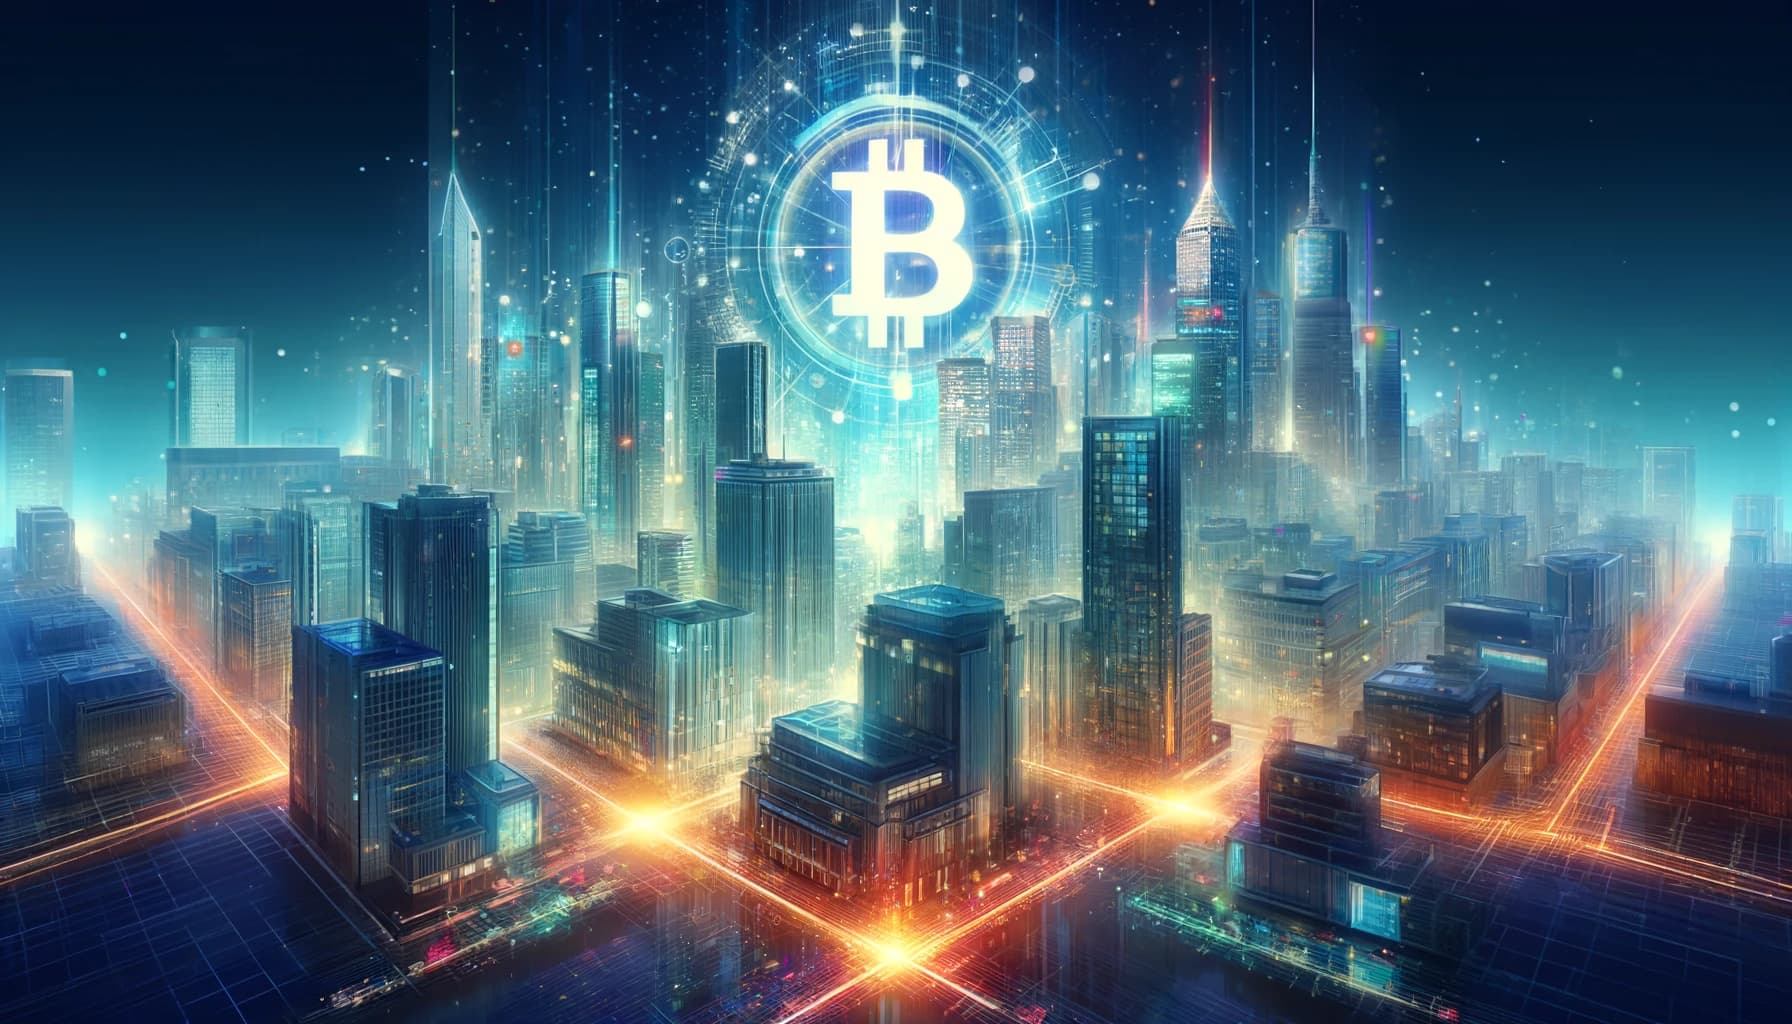 Bucket Technologies image showing a large metropolitan city with a Bitcoin logo floating above it's center.